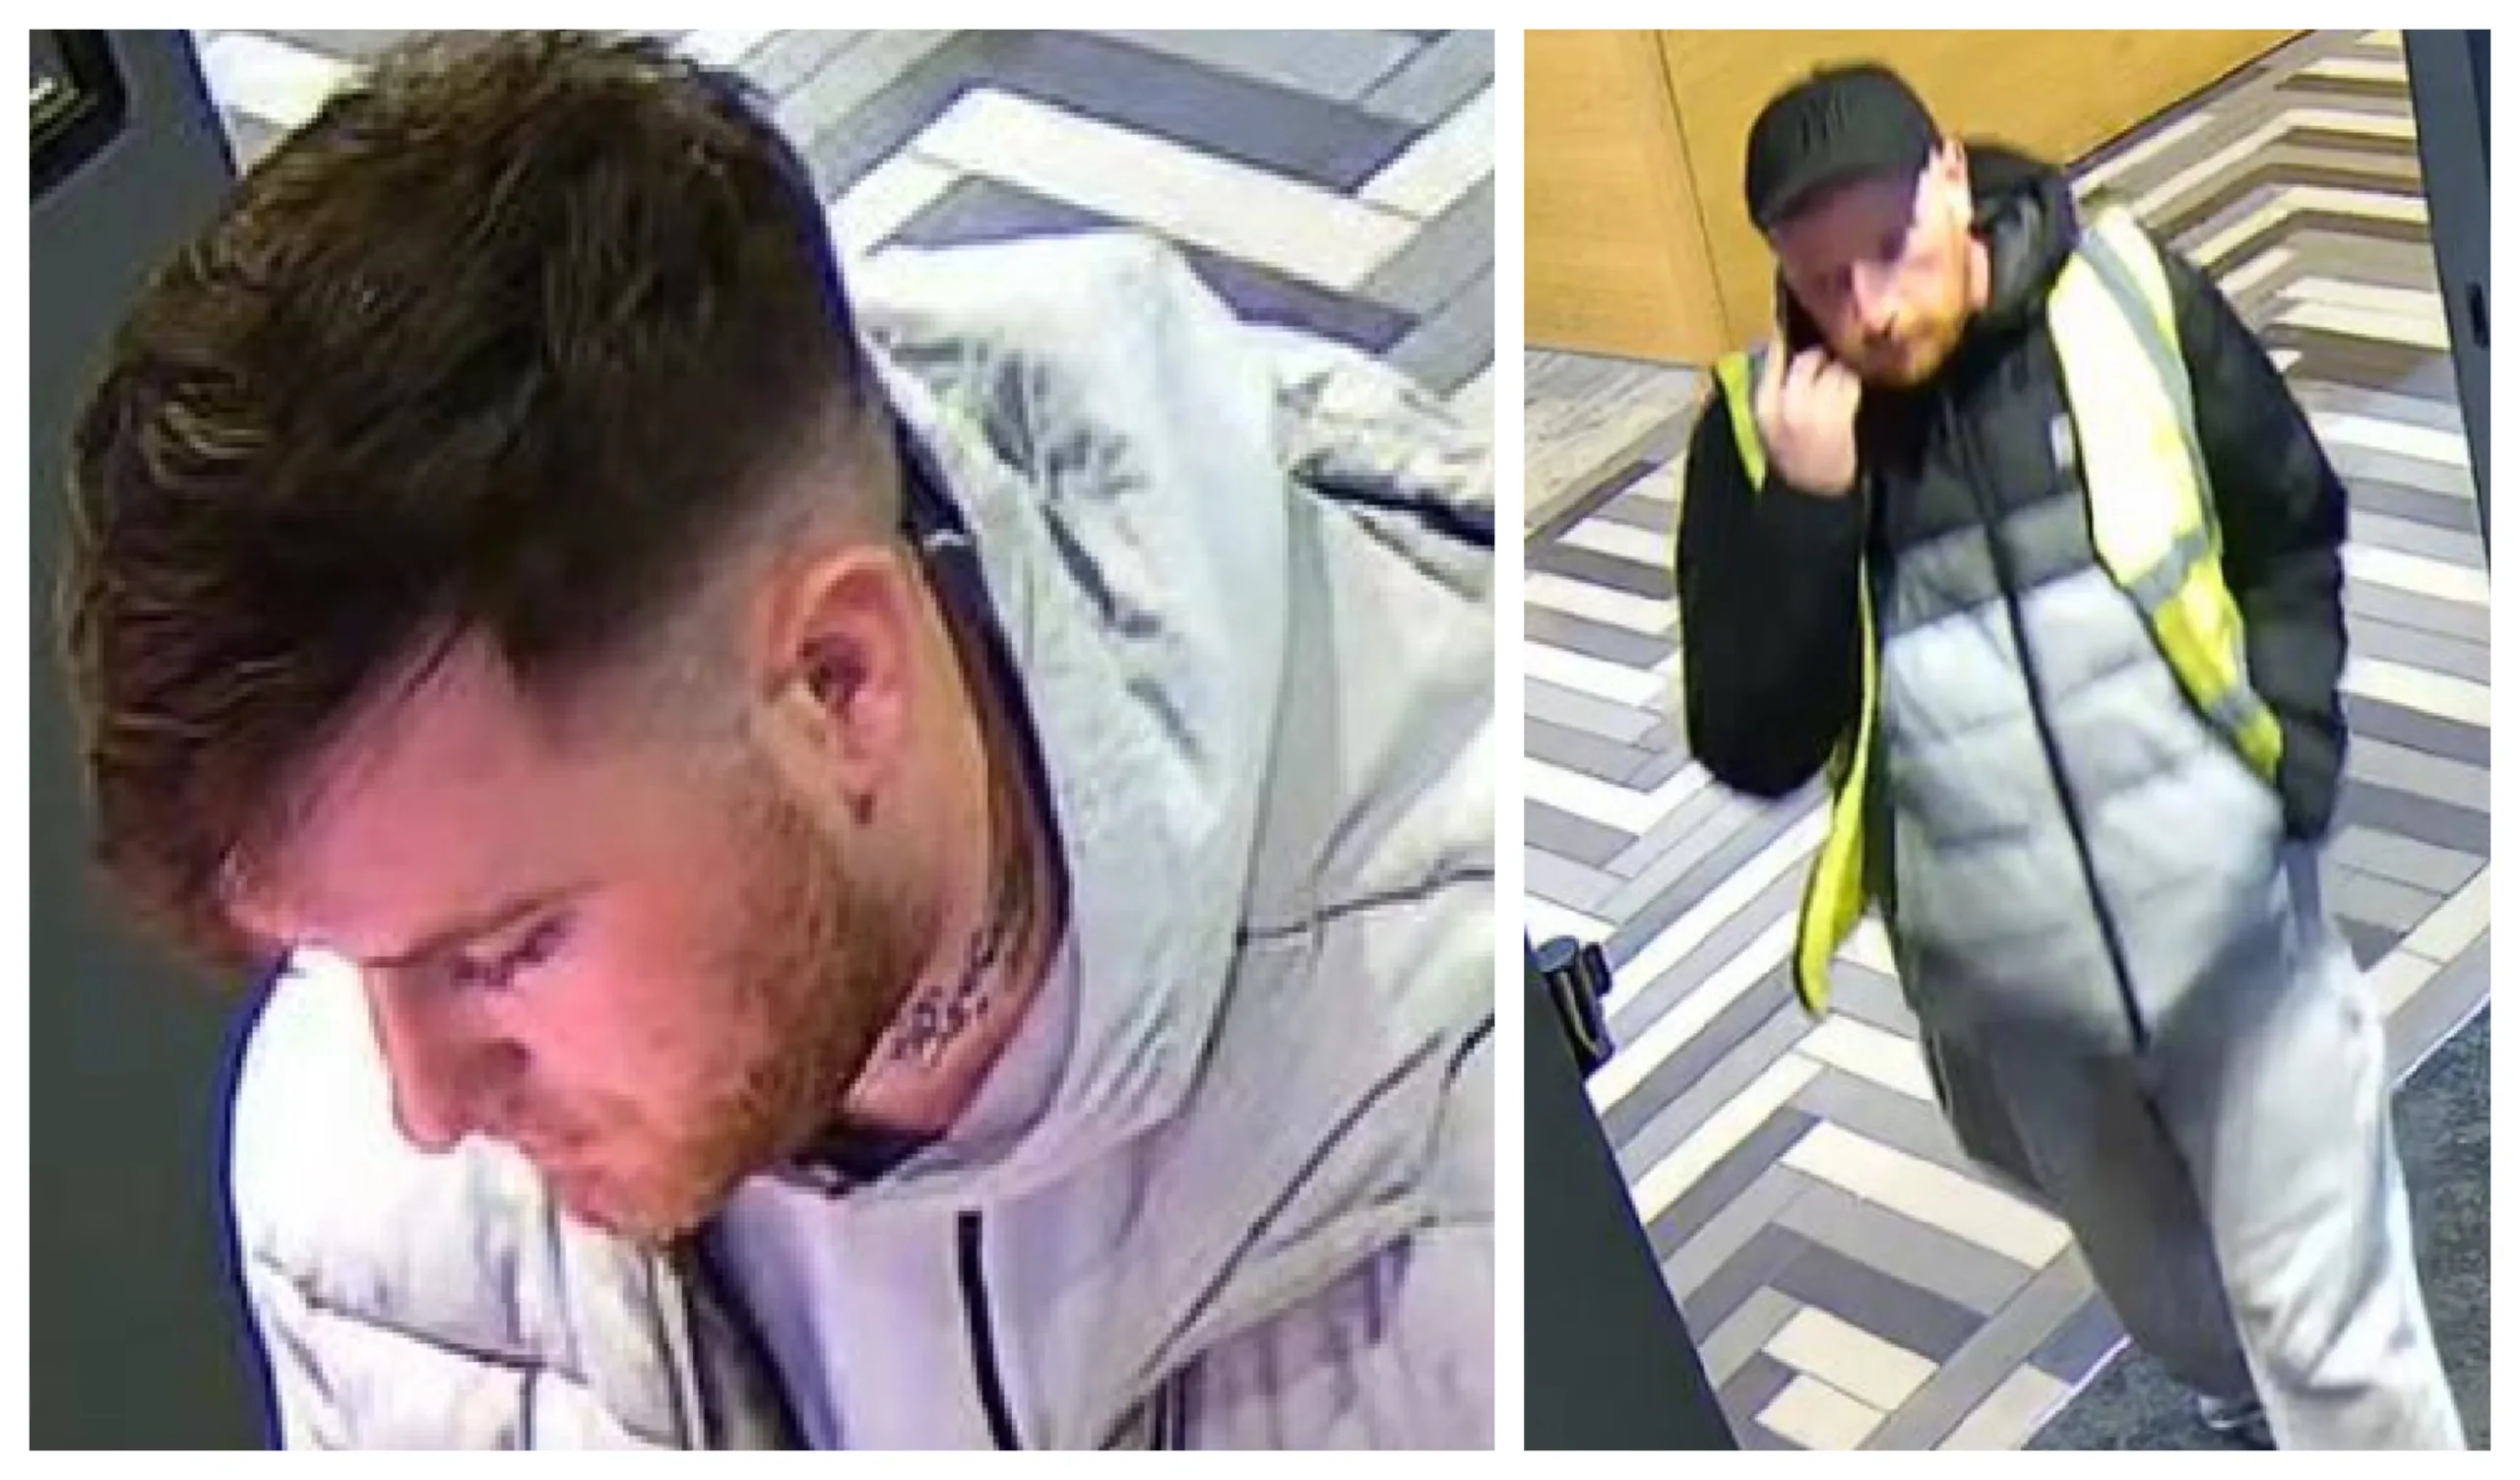 Police have released CCTV images of two men they would like to speak to in connection with attempted thefts after 34 lorries were cut open.